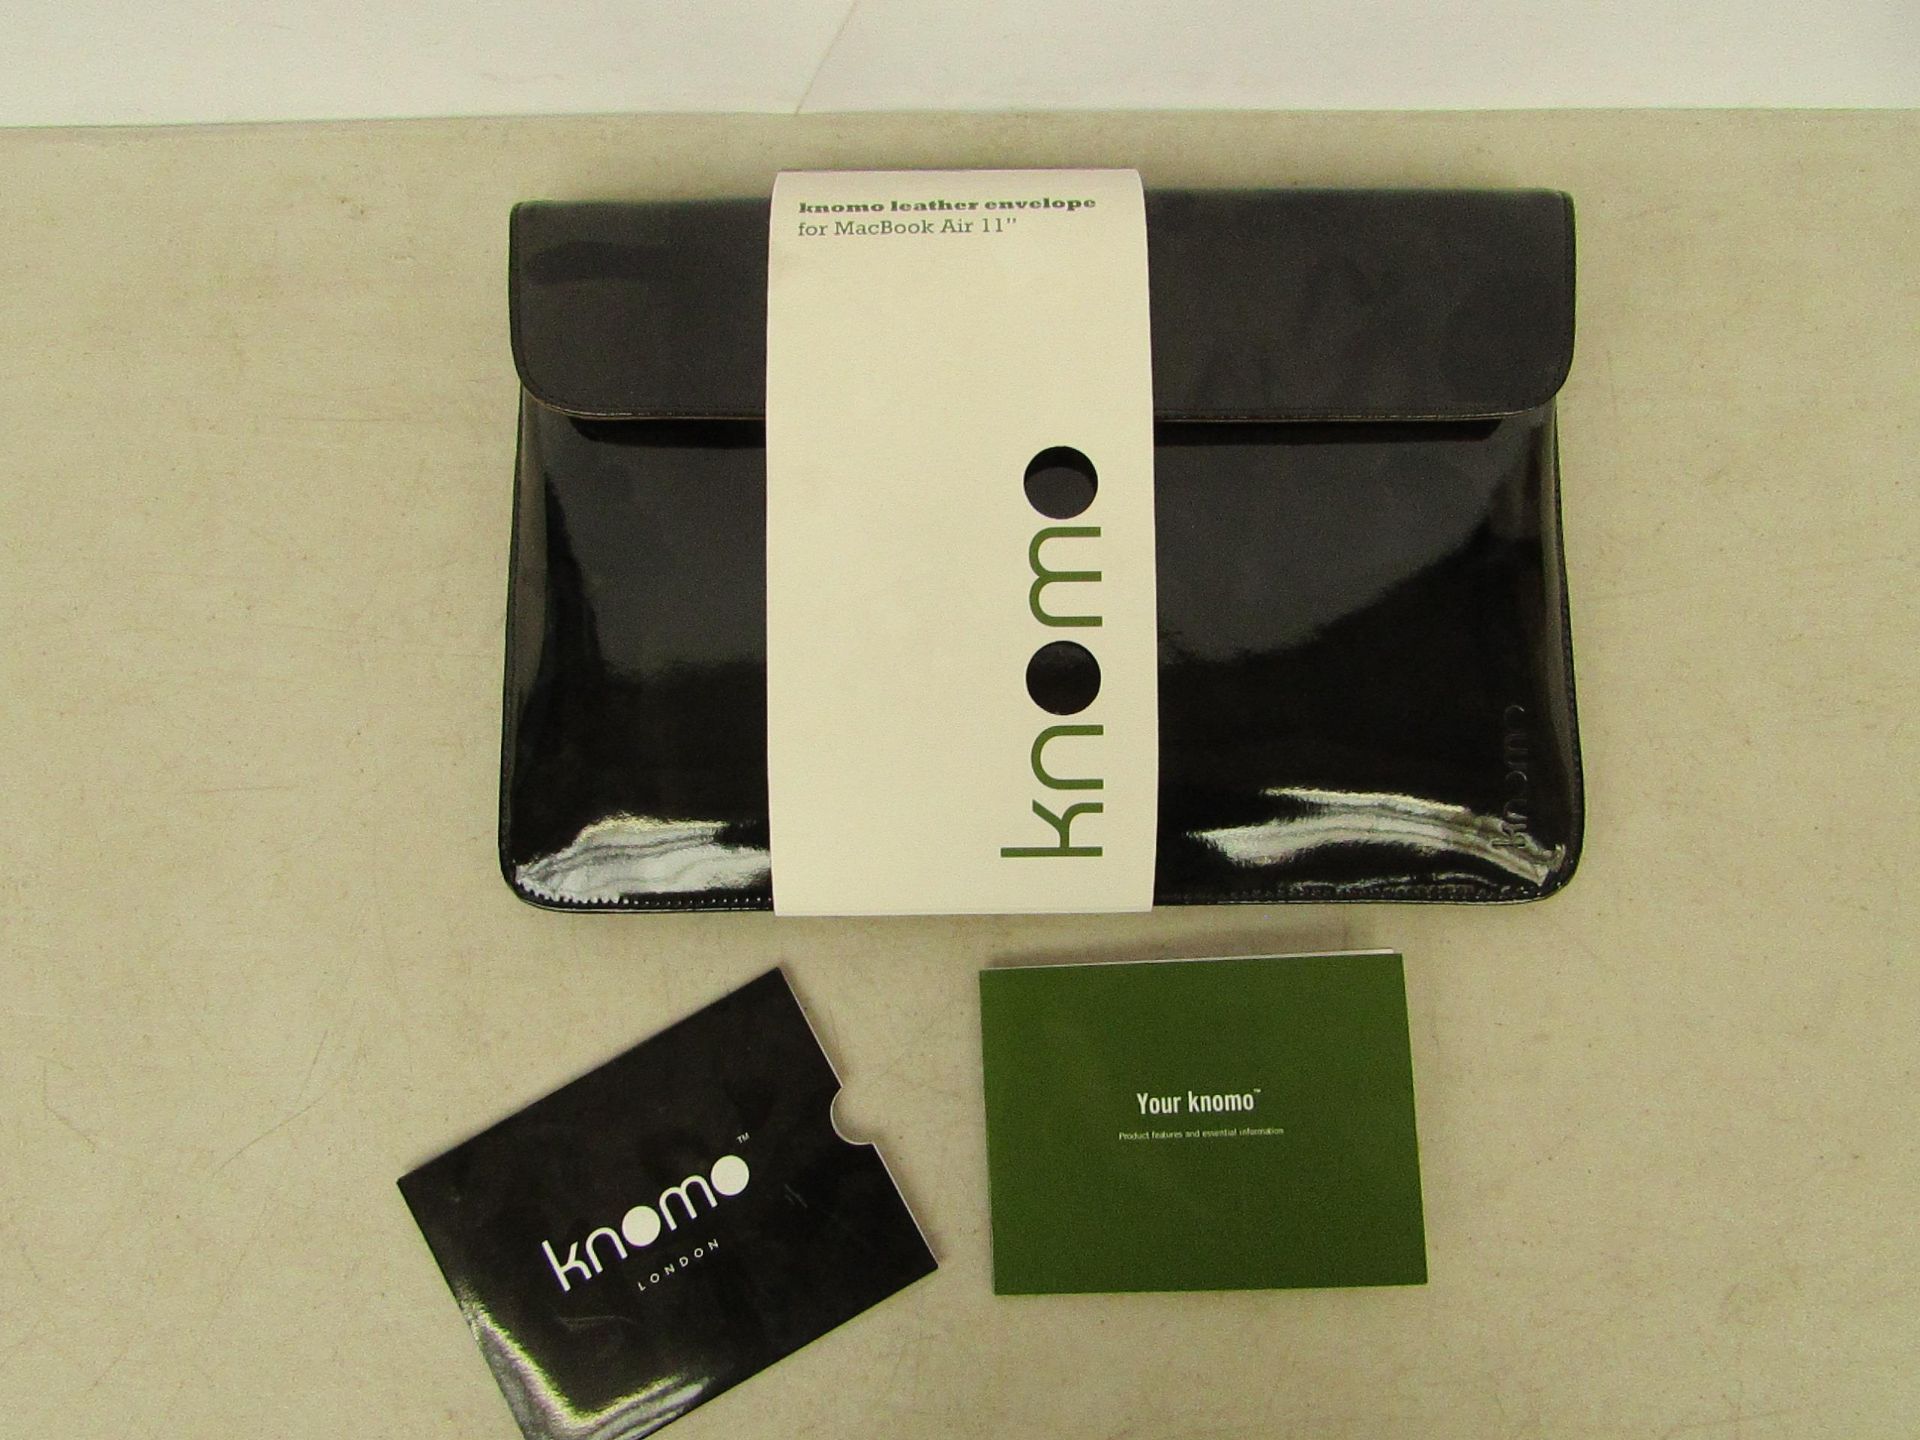 10x Knomo black leather envelope for MacBook Air 11", brand new and boxed/packaged. Each RRP £49.